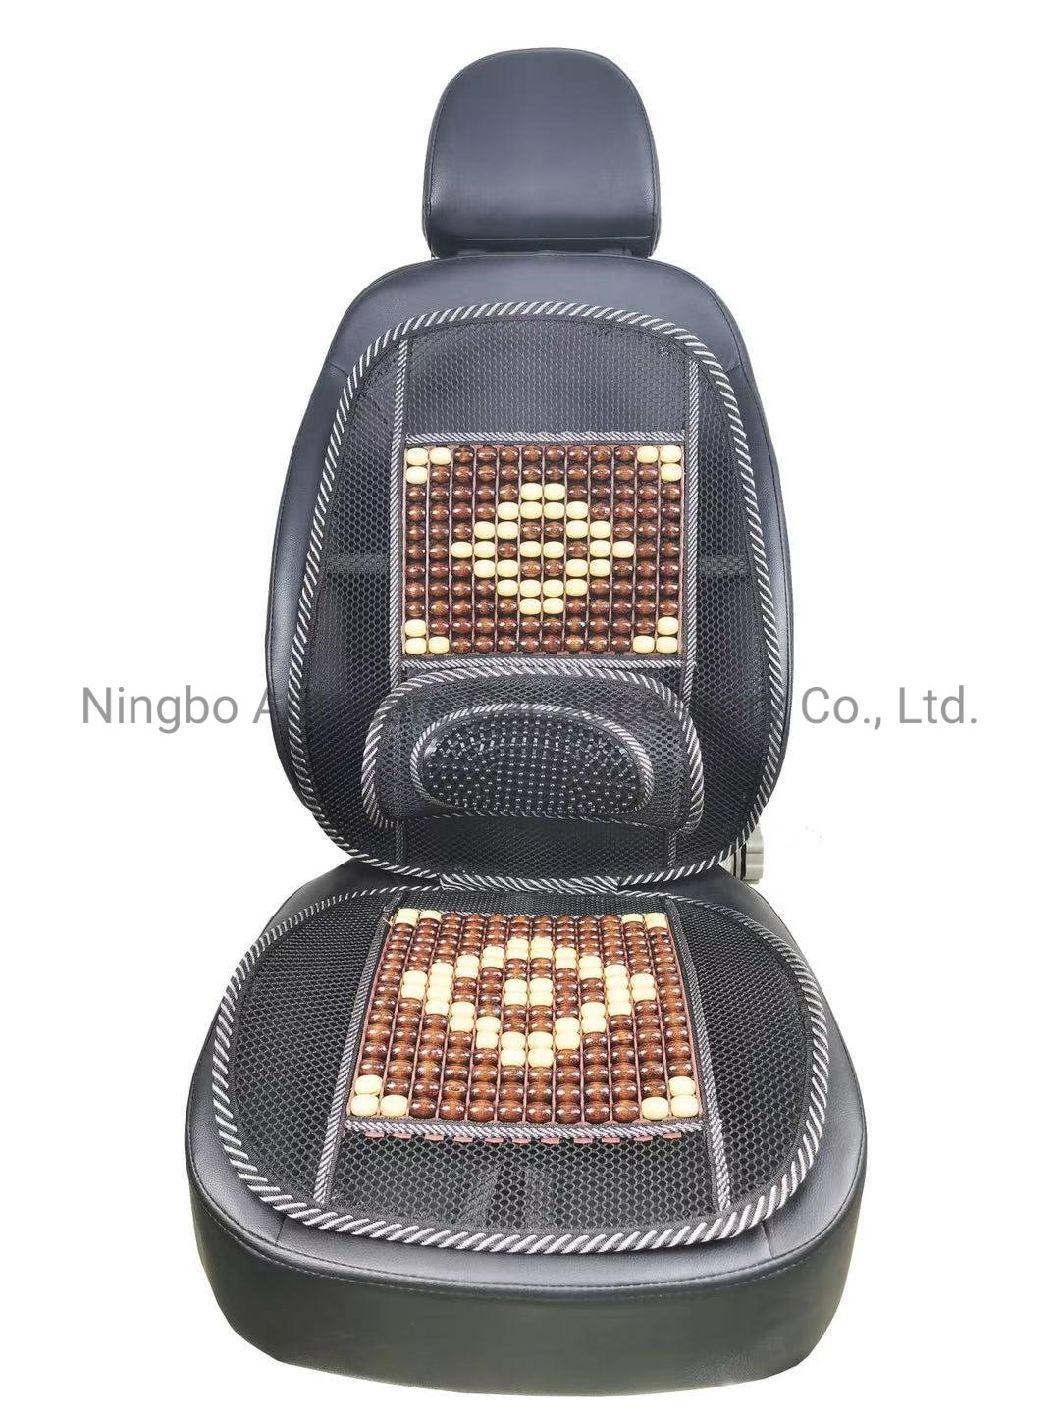 Wooden Beads Seat Cushion High Quality Wooden Beads Seat Cushion Massage Wooden Beads Seat Cushion